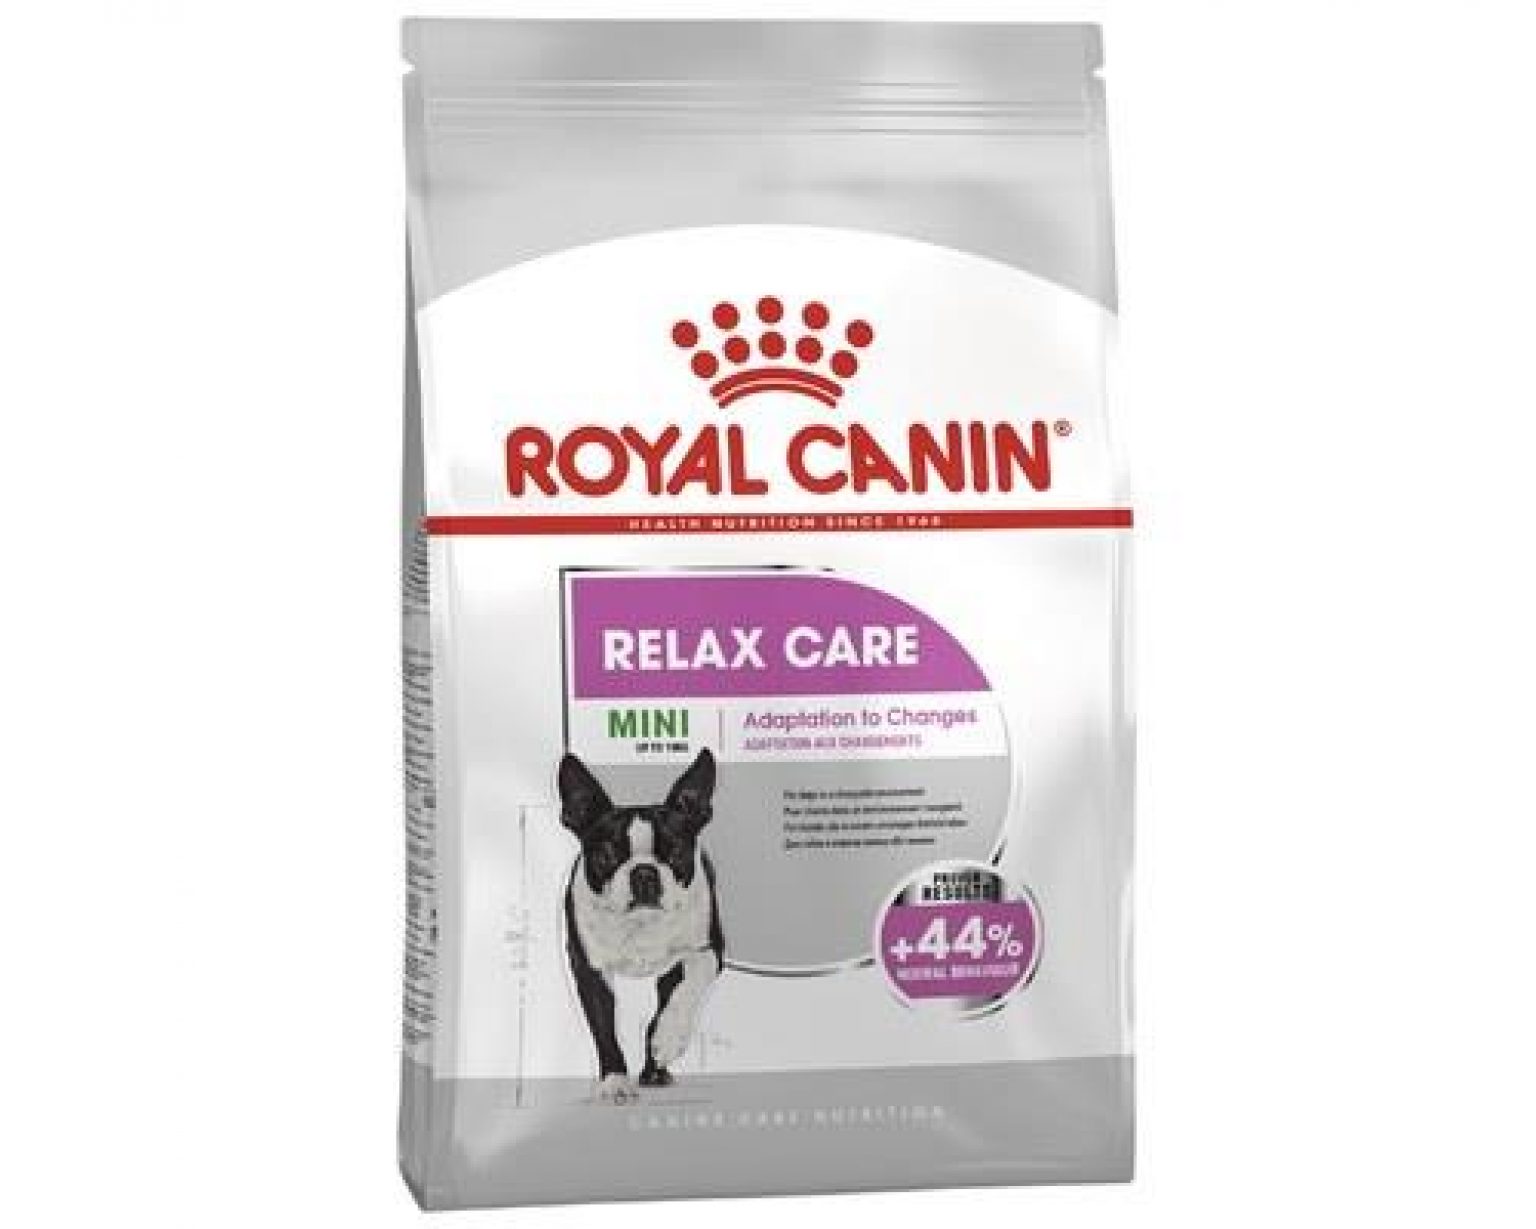 Royal Canin Mini Relax Care Adult Dog Dry Food 3kg | Pet Food Reviews